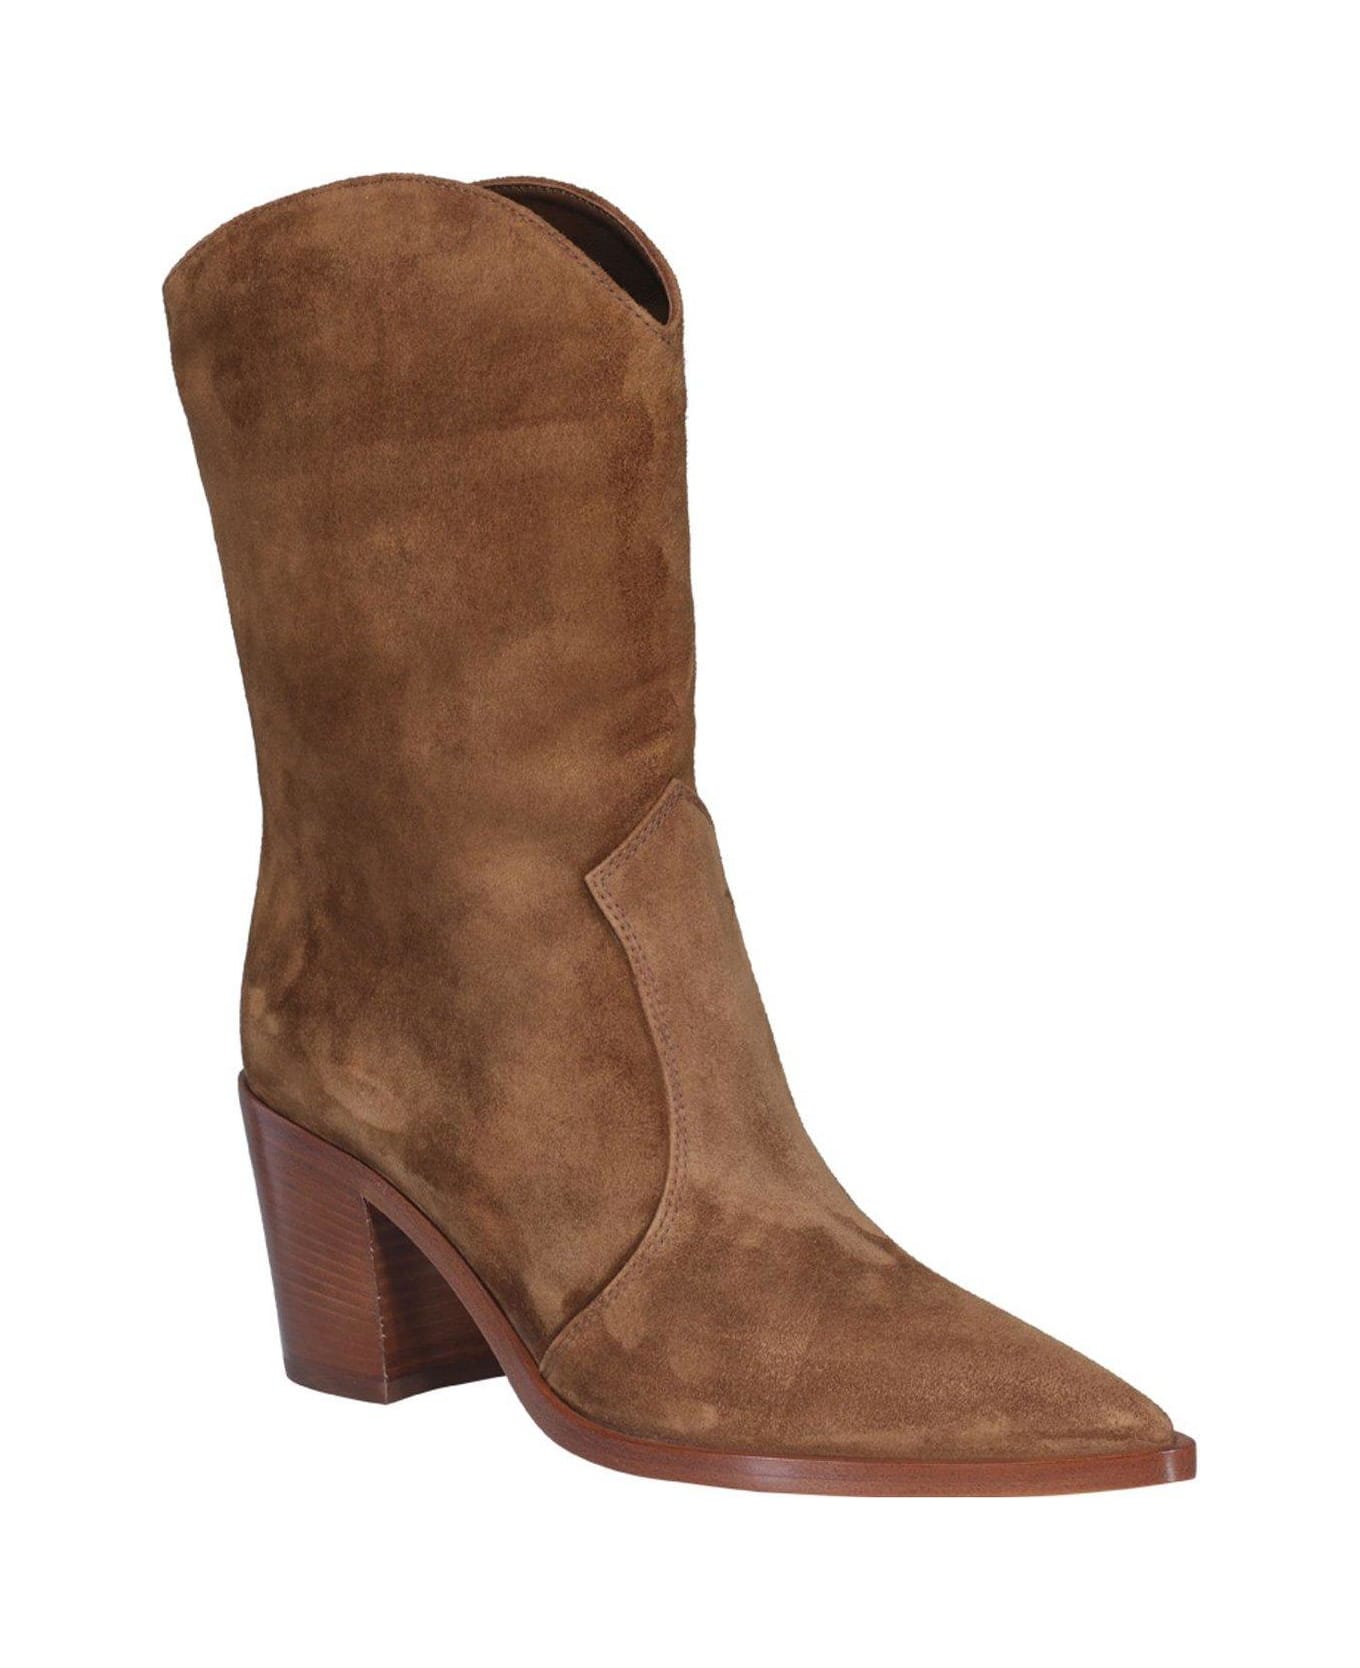 Gianvito Rossi Denver Pointed-toe Boots - TEXAS ブーツ